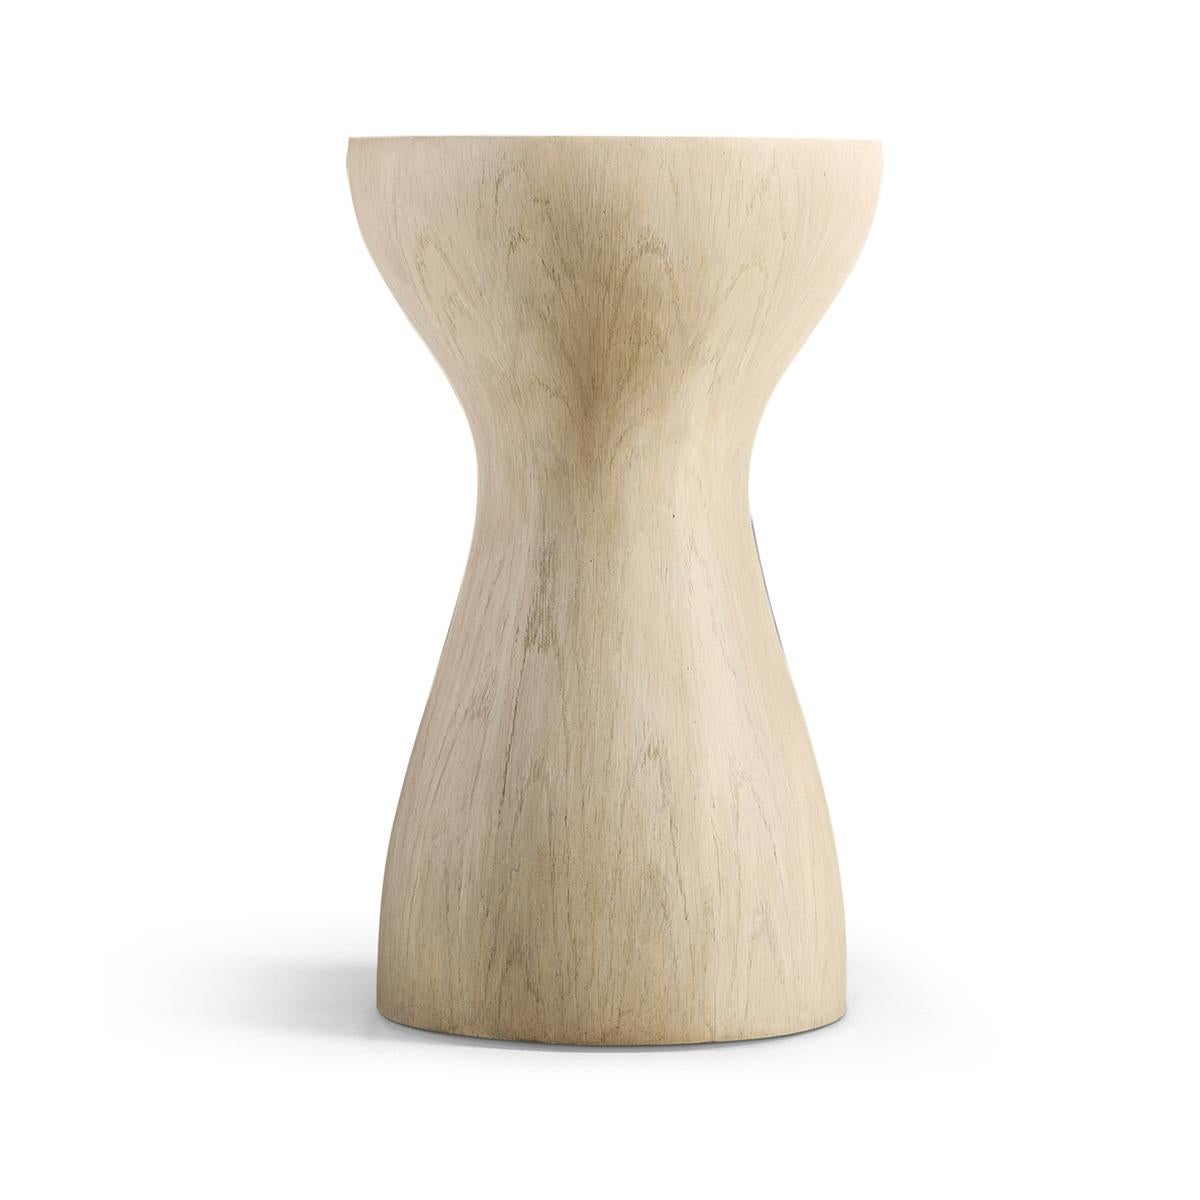 The Organic Modern Accent Table has a visually descriptive elegance all its own. Unending symmetry, remarkable simplicity and true down-to-earth balance come together in expertly crafted solid hardwoods and veneers finished in bleached oak. With a